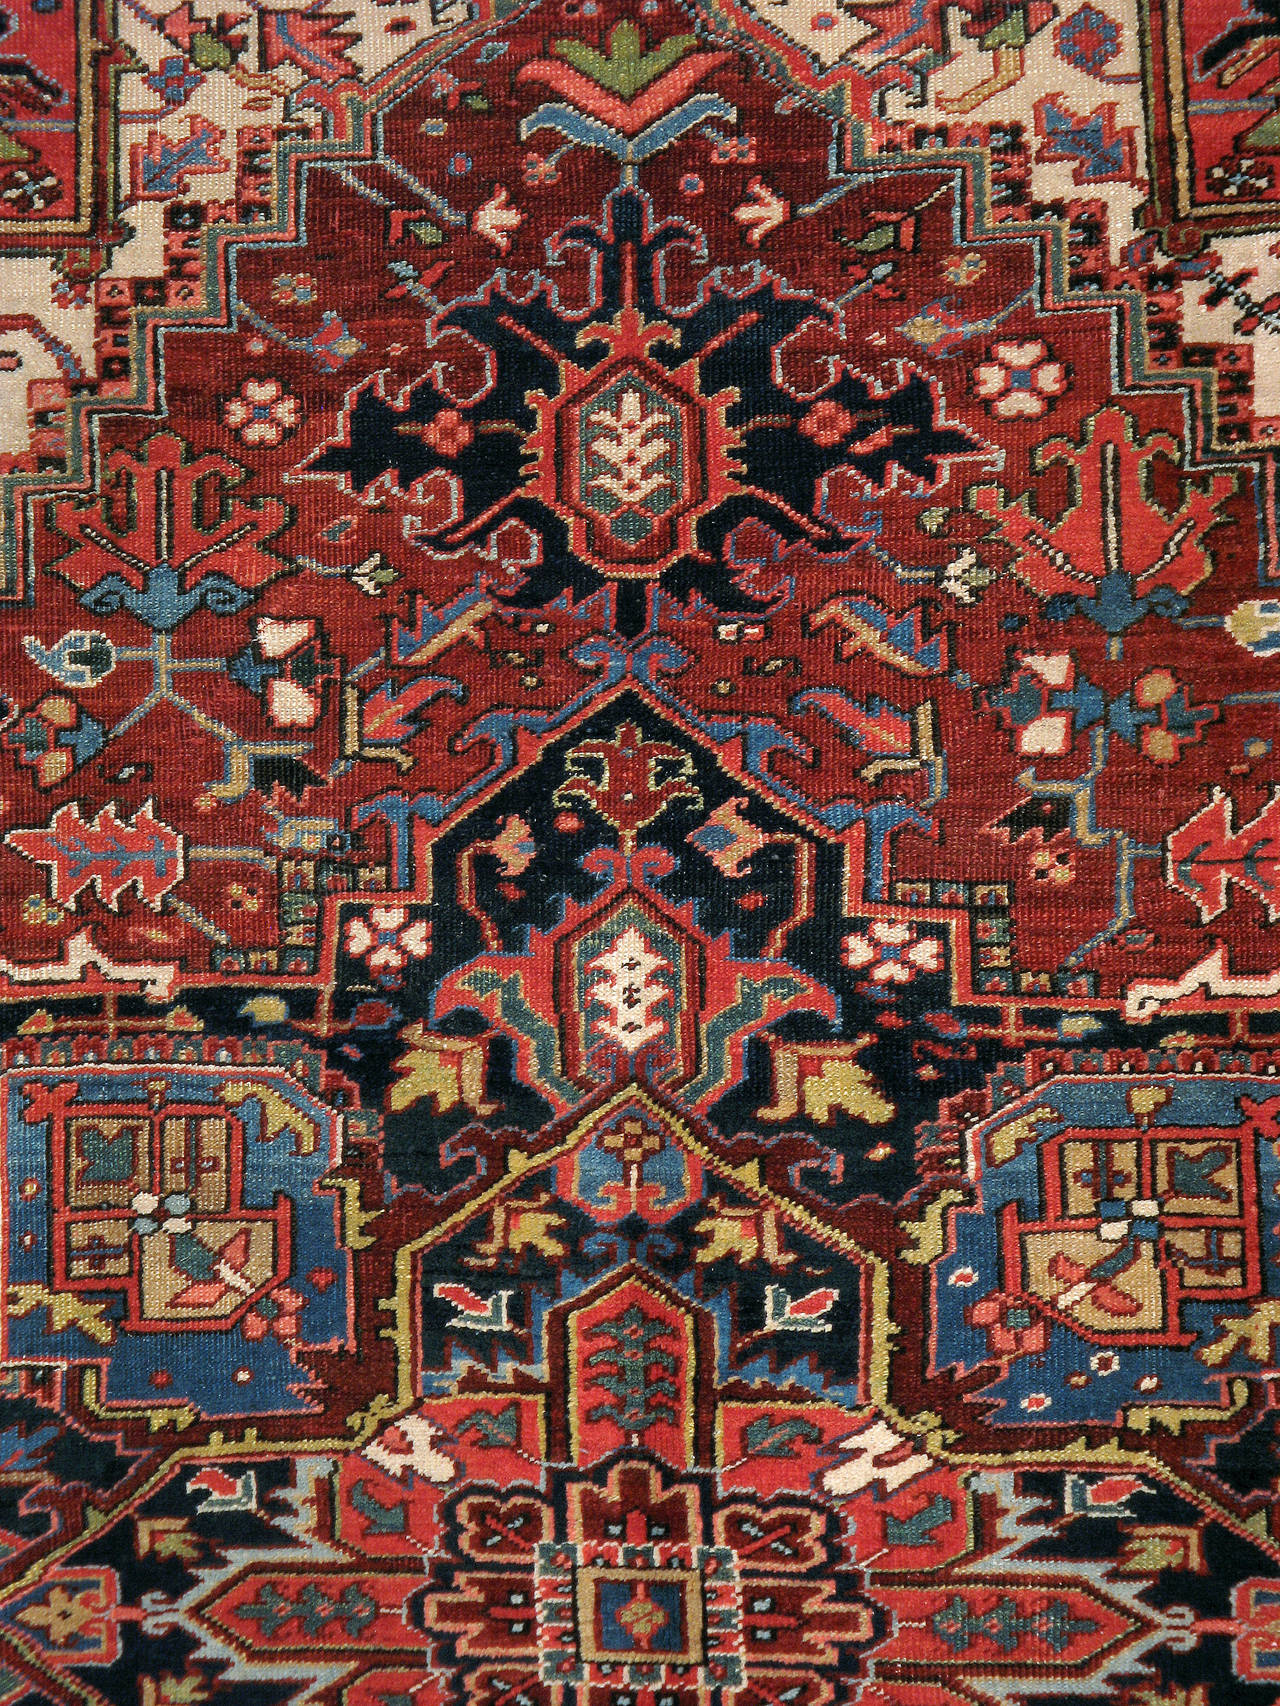 An antique Persian Heriz carpet from the second quarter of the 20th century.